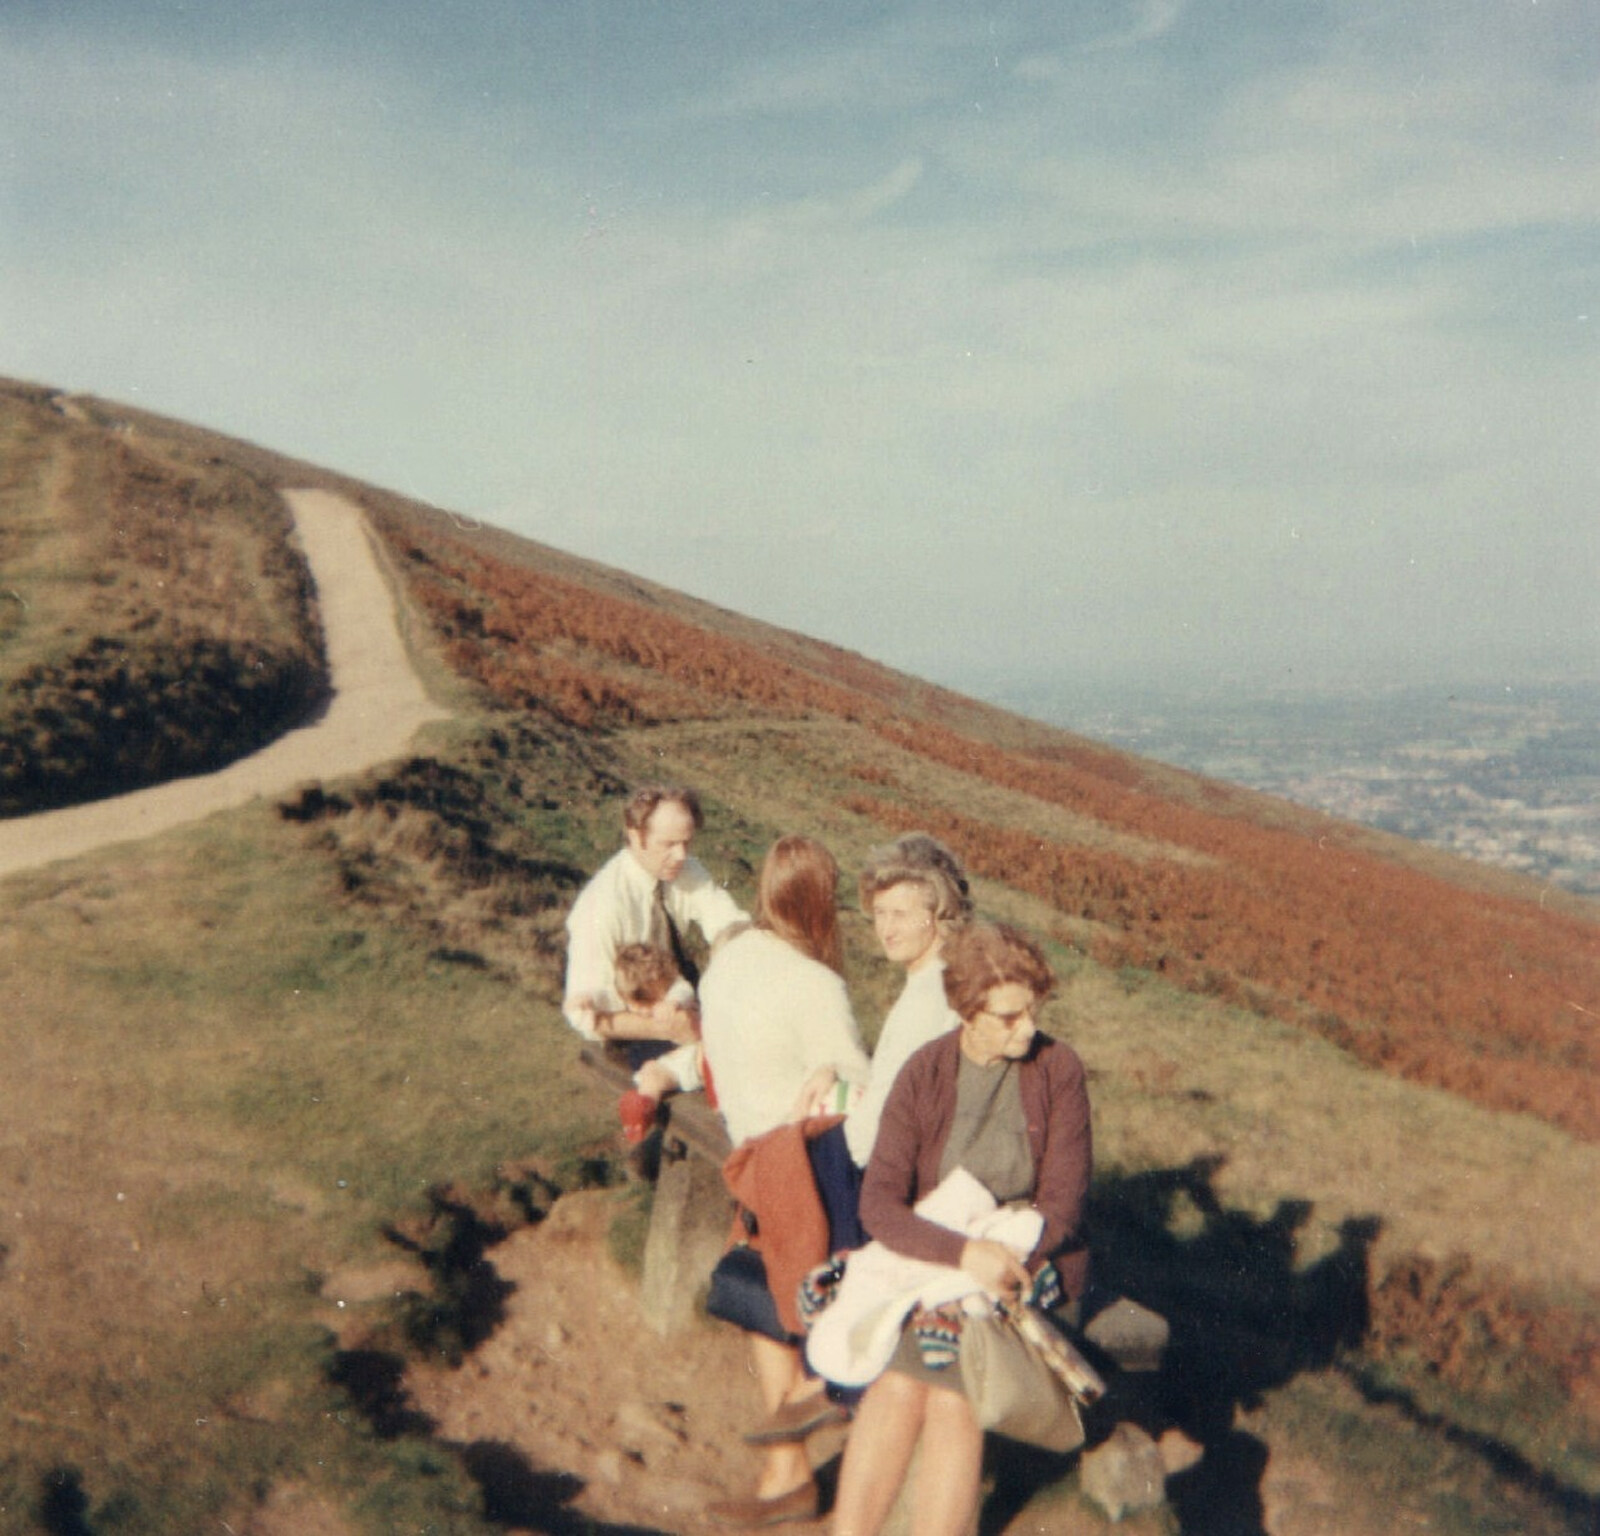 Family History: The 1970s, Timperley and Sandbach, Cheshire - 24th January 2020: Malvern Hills, 1969/70